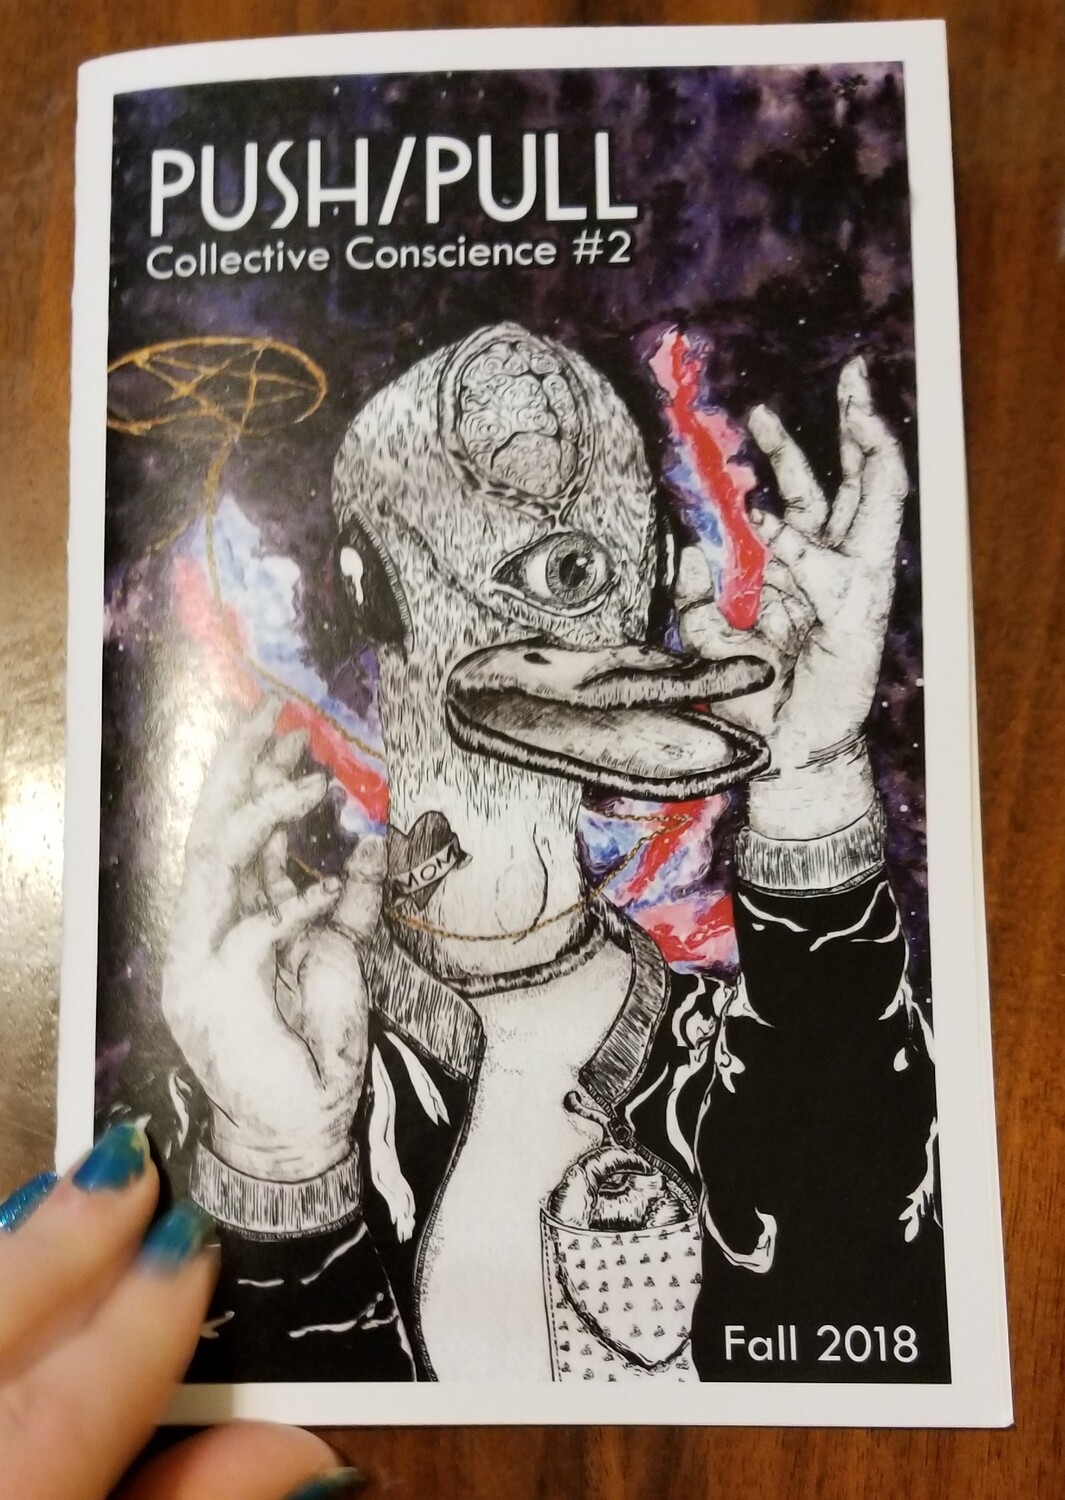 Collective Conscience #2 - Book by Push/Pull Members